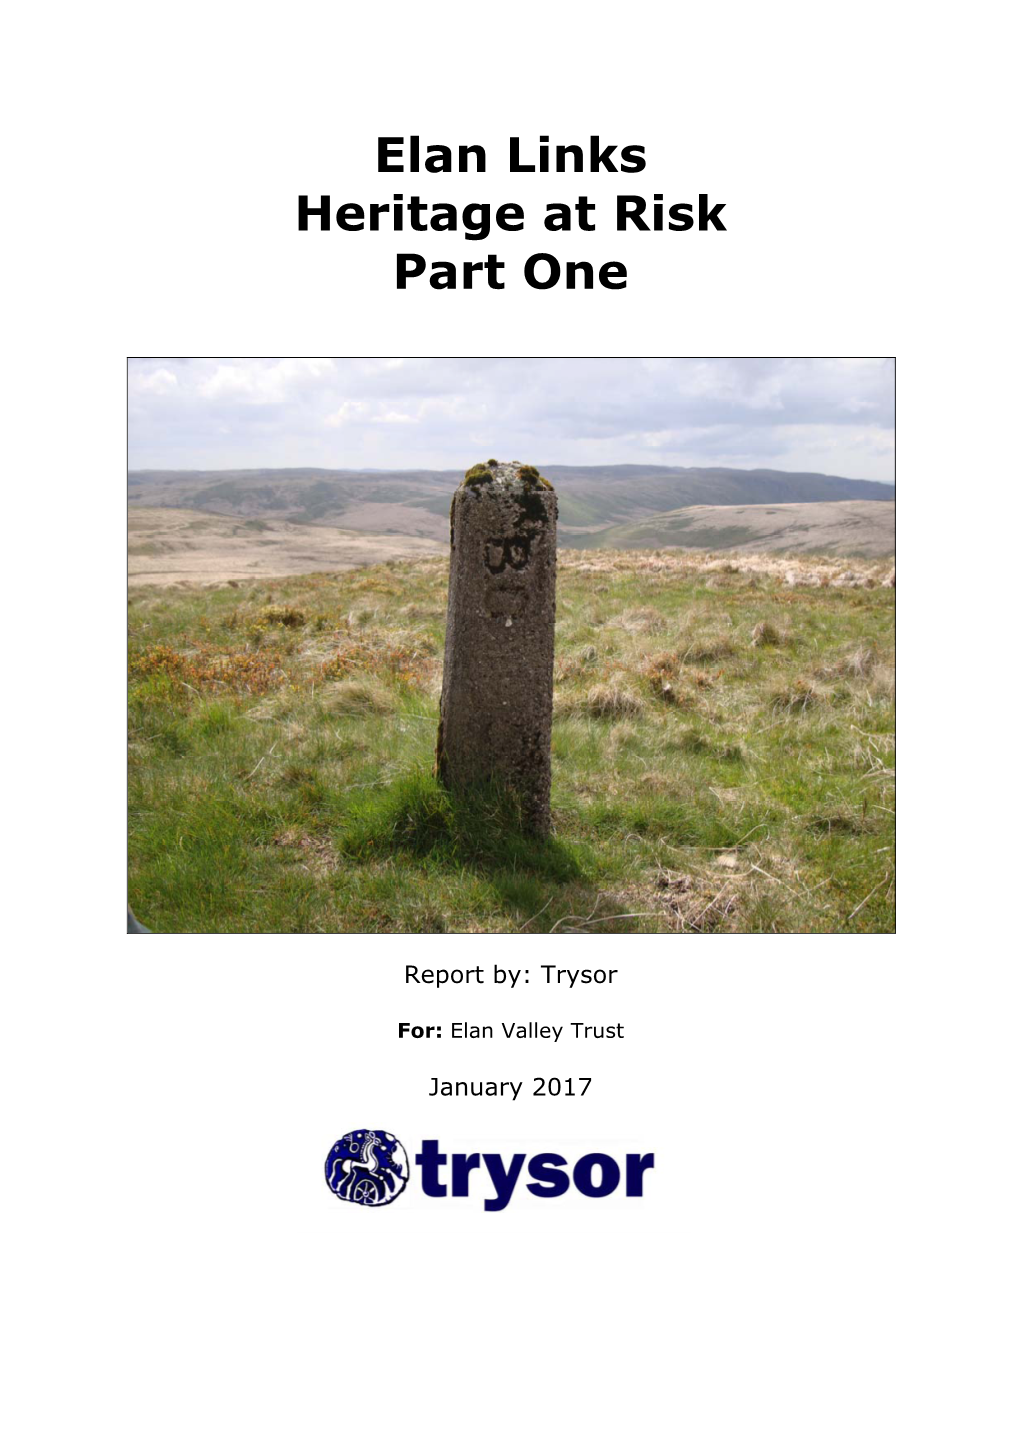 Heritage at Risk Survey of the Historic Assets Within the Elan Links Project Area, in Order to Inform the Objectives of the Project, in Particular Objective 4